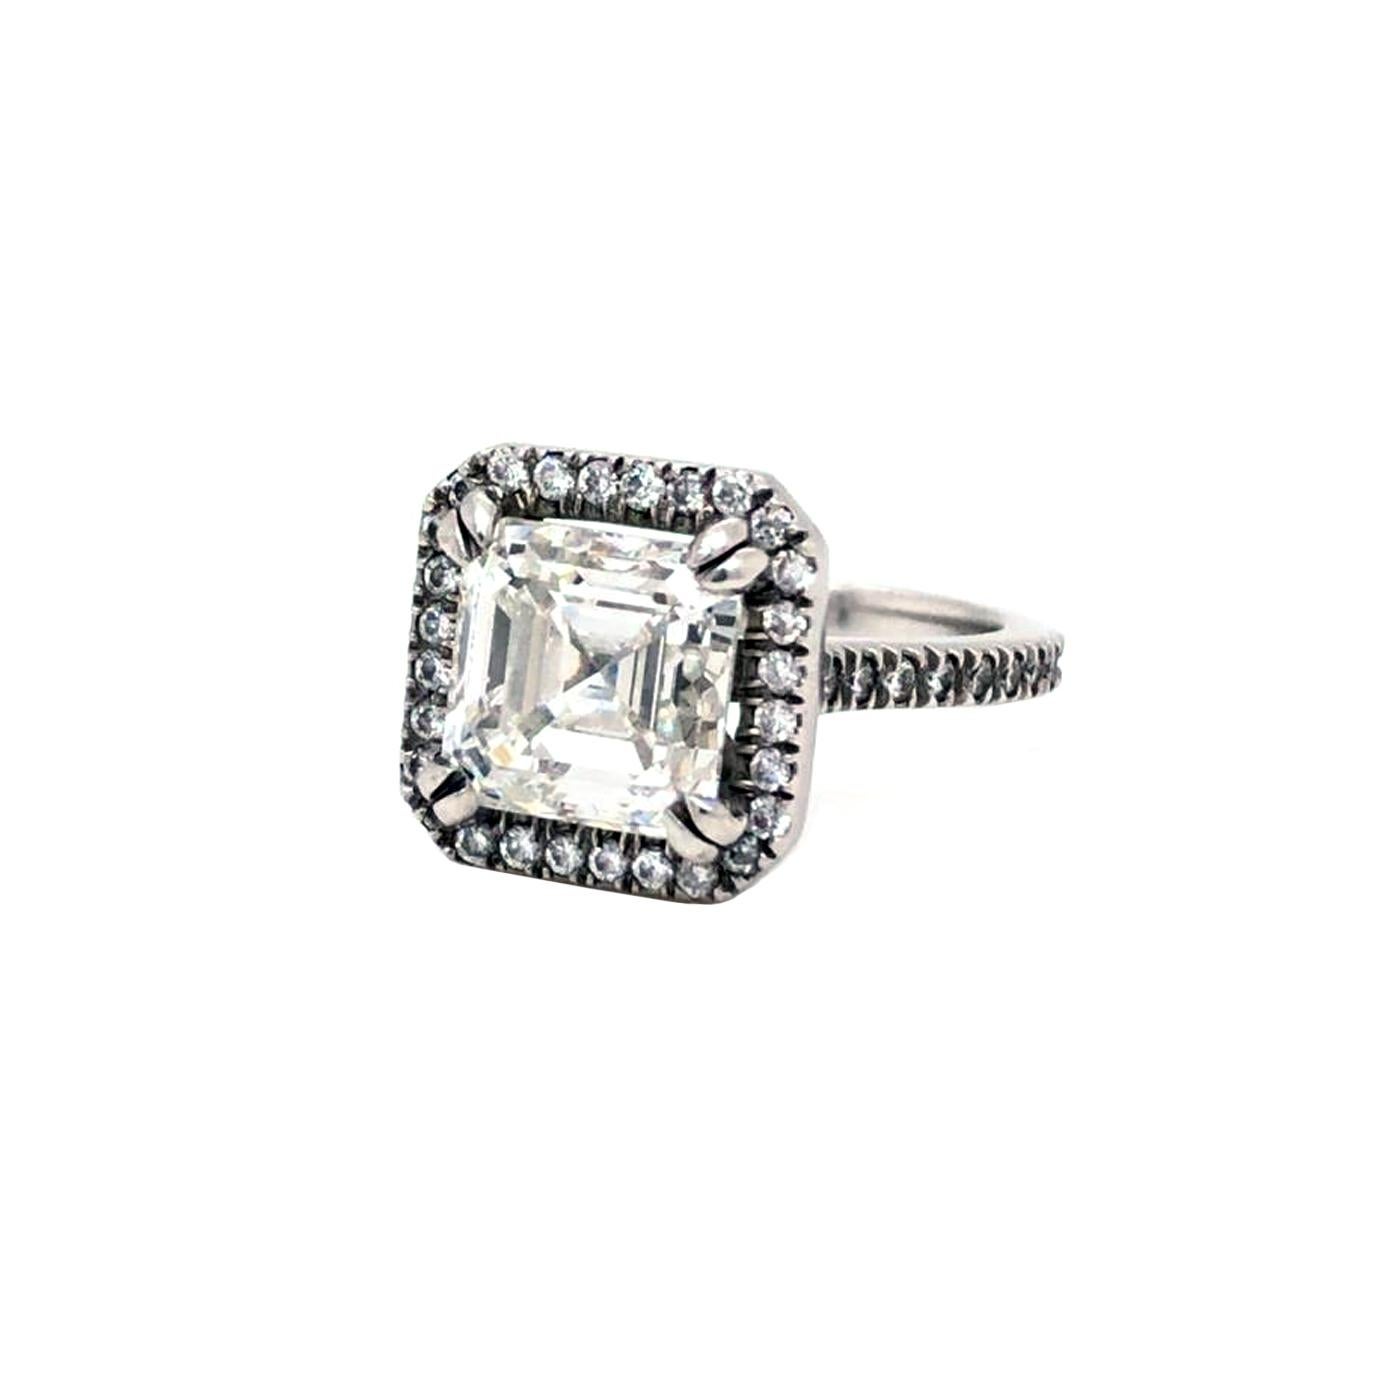 GIA Certified 4.02ct Asscher Cut Diamond VS1 Clarity H Color Platinum Ring In New Condition For Sale In Aventura, FL